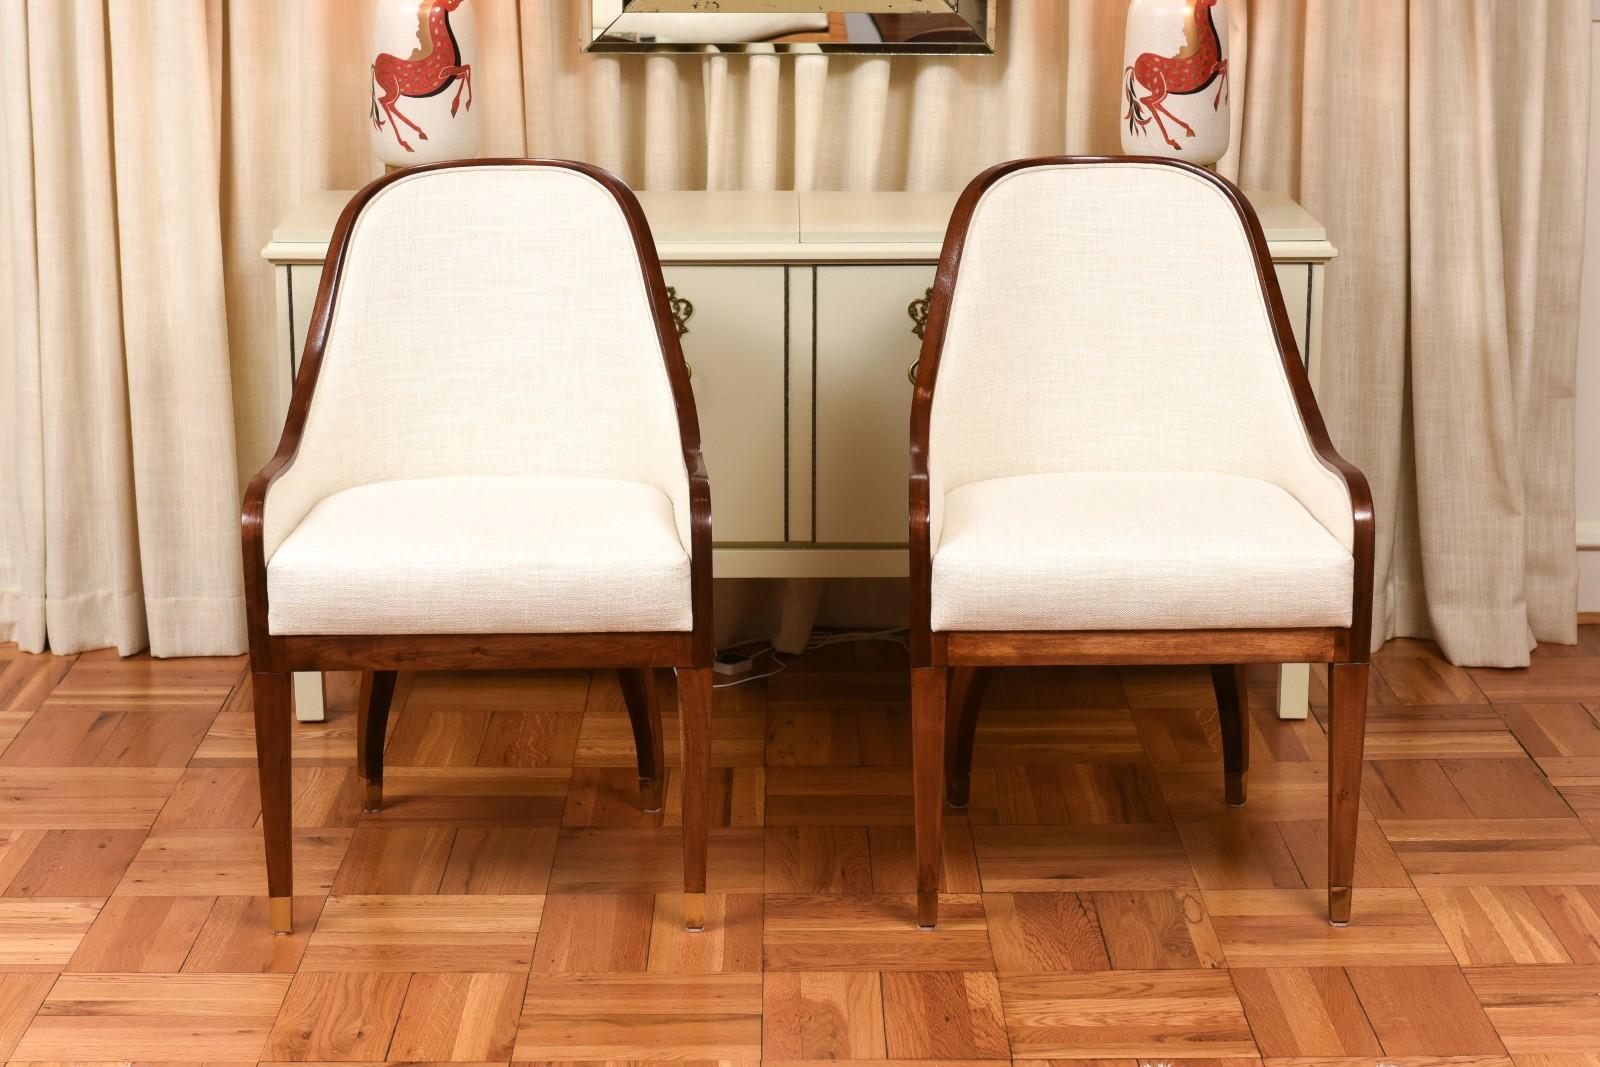 Spectacular Set of 10 Art Deco Revival Chairs in Bookmatch Figured Walnut For Sale 1